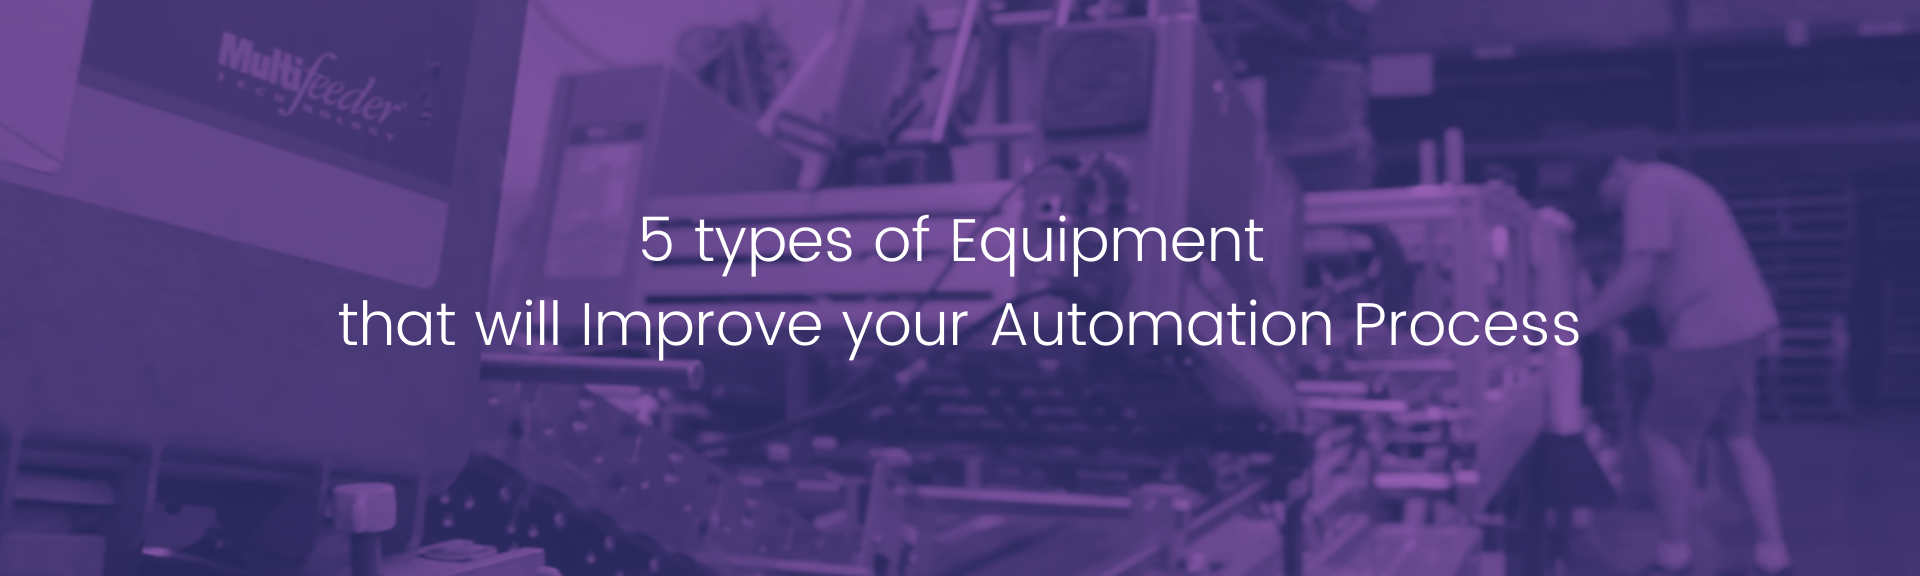 5 types of Equipment that will Improve your Automation Process